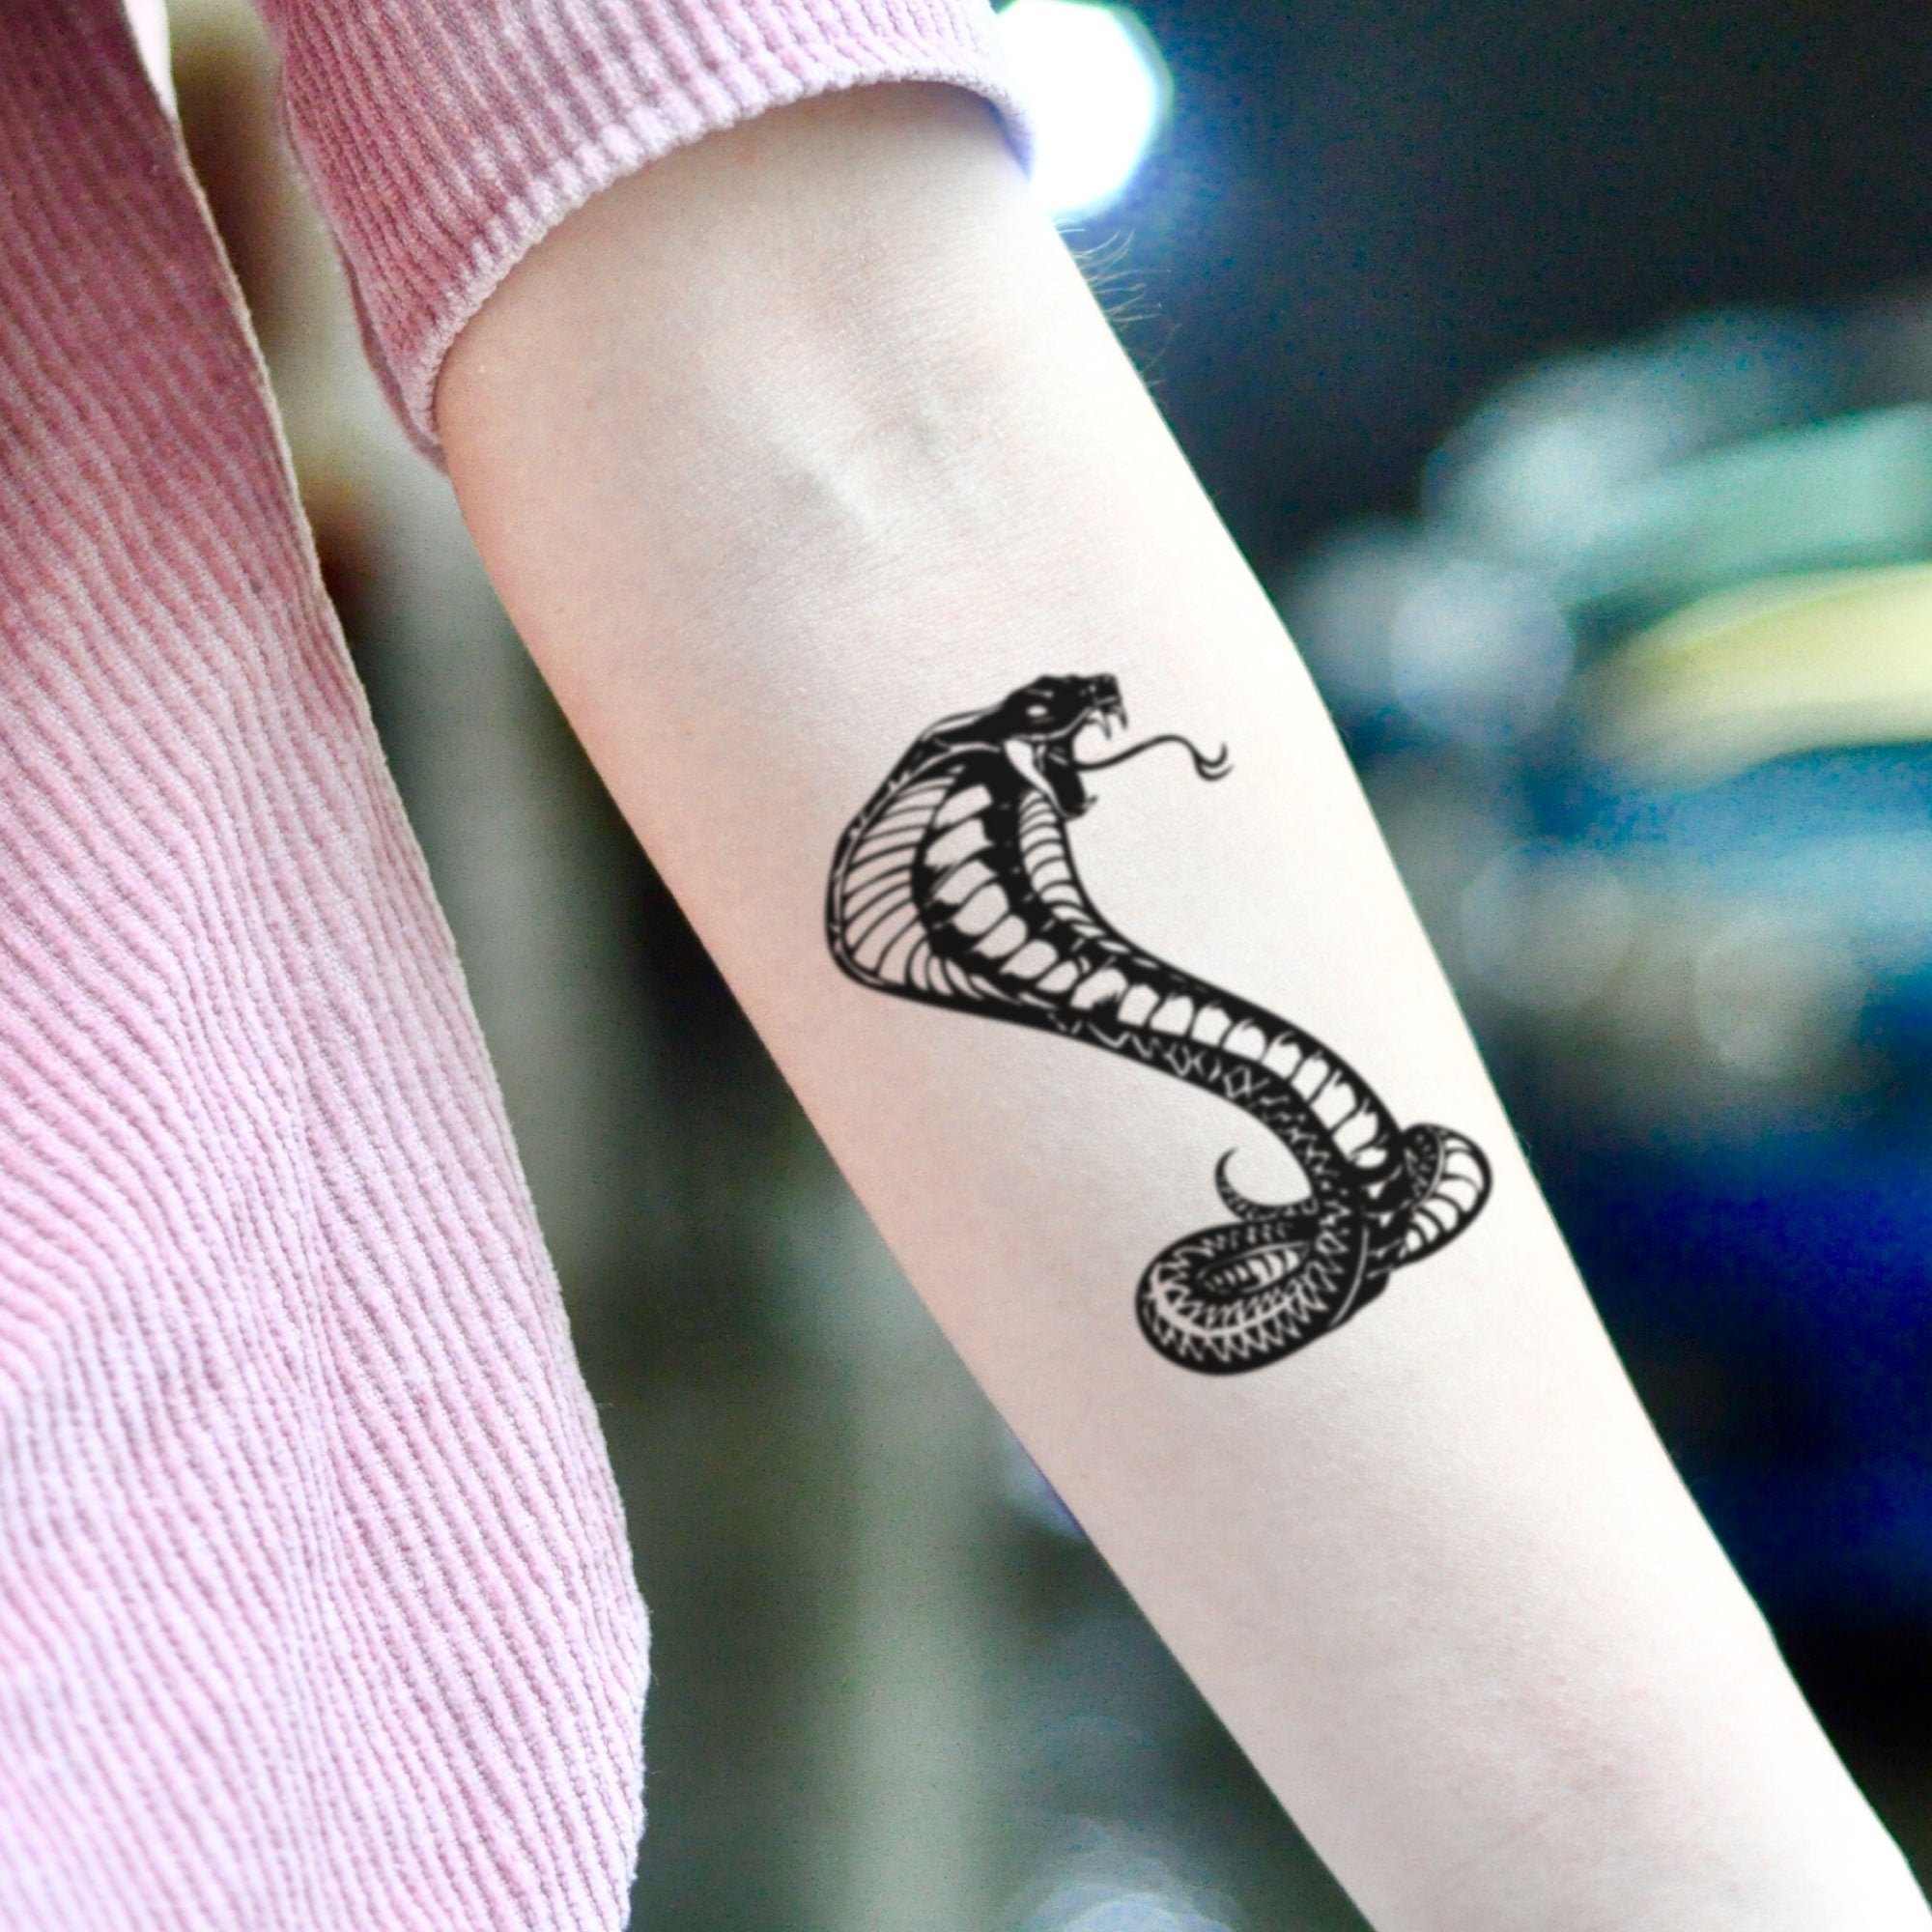 55 Amazing Small Snake Tattoo Ideas To Inspire You In 2023! - Outsons